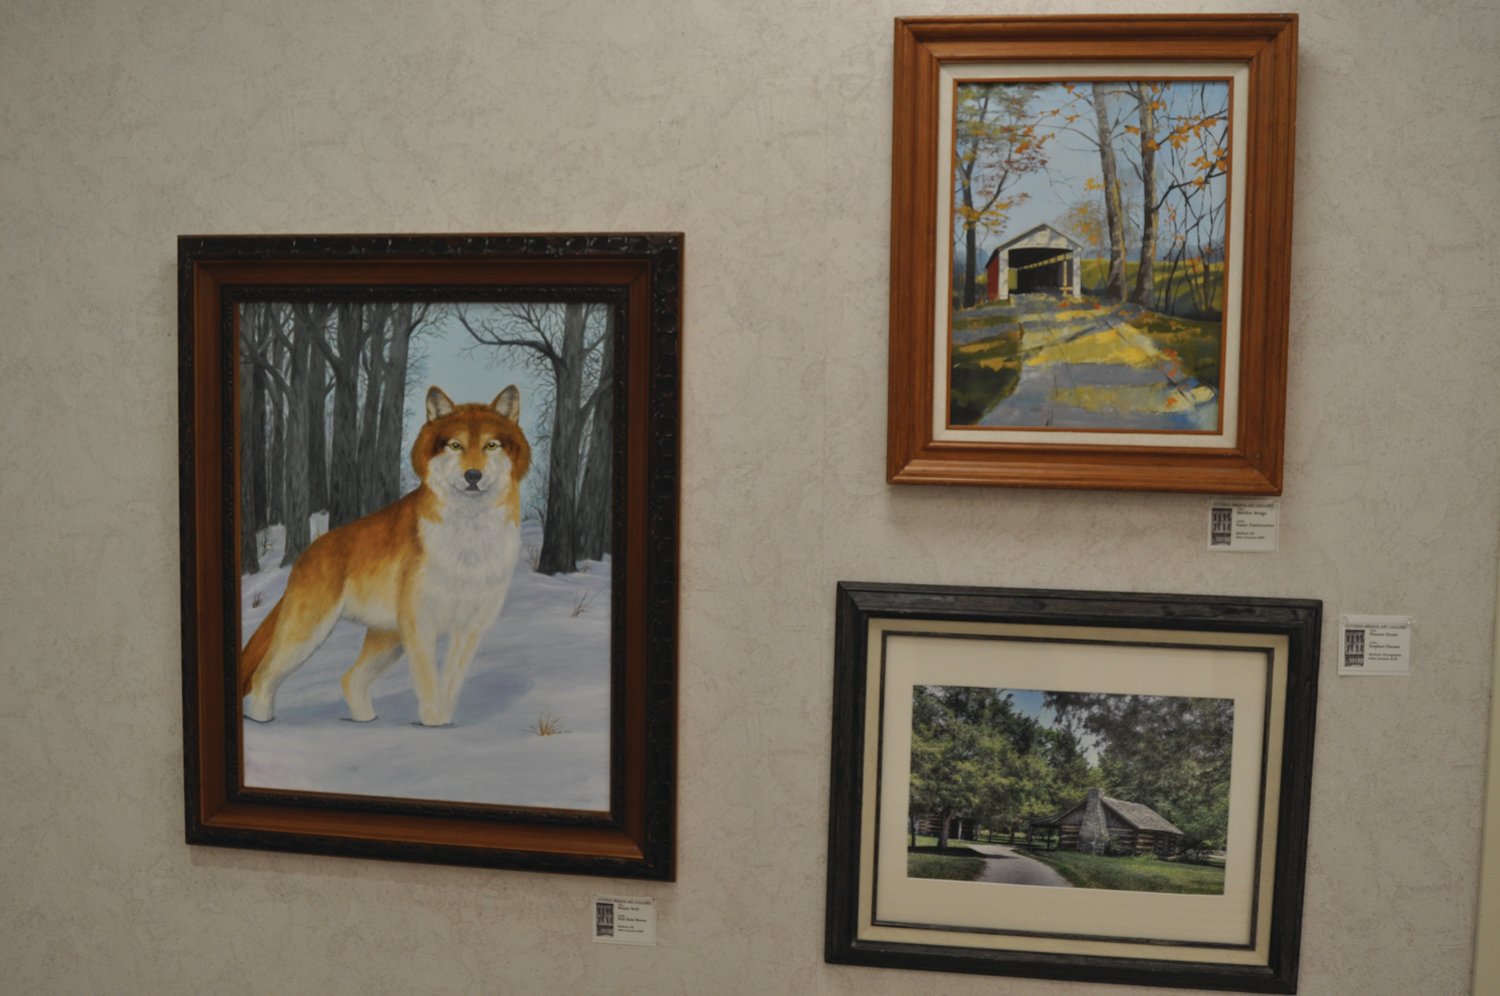 Paintings by members of the Covered Bridge Art Association are currently on display at the Crawfordsville District Public Library